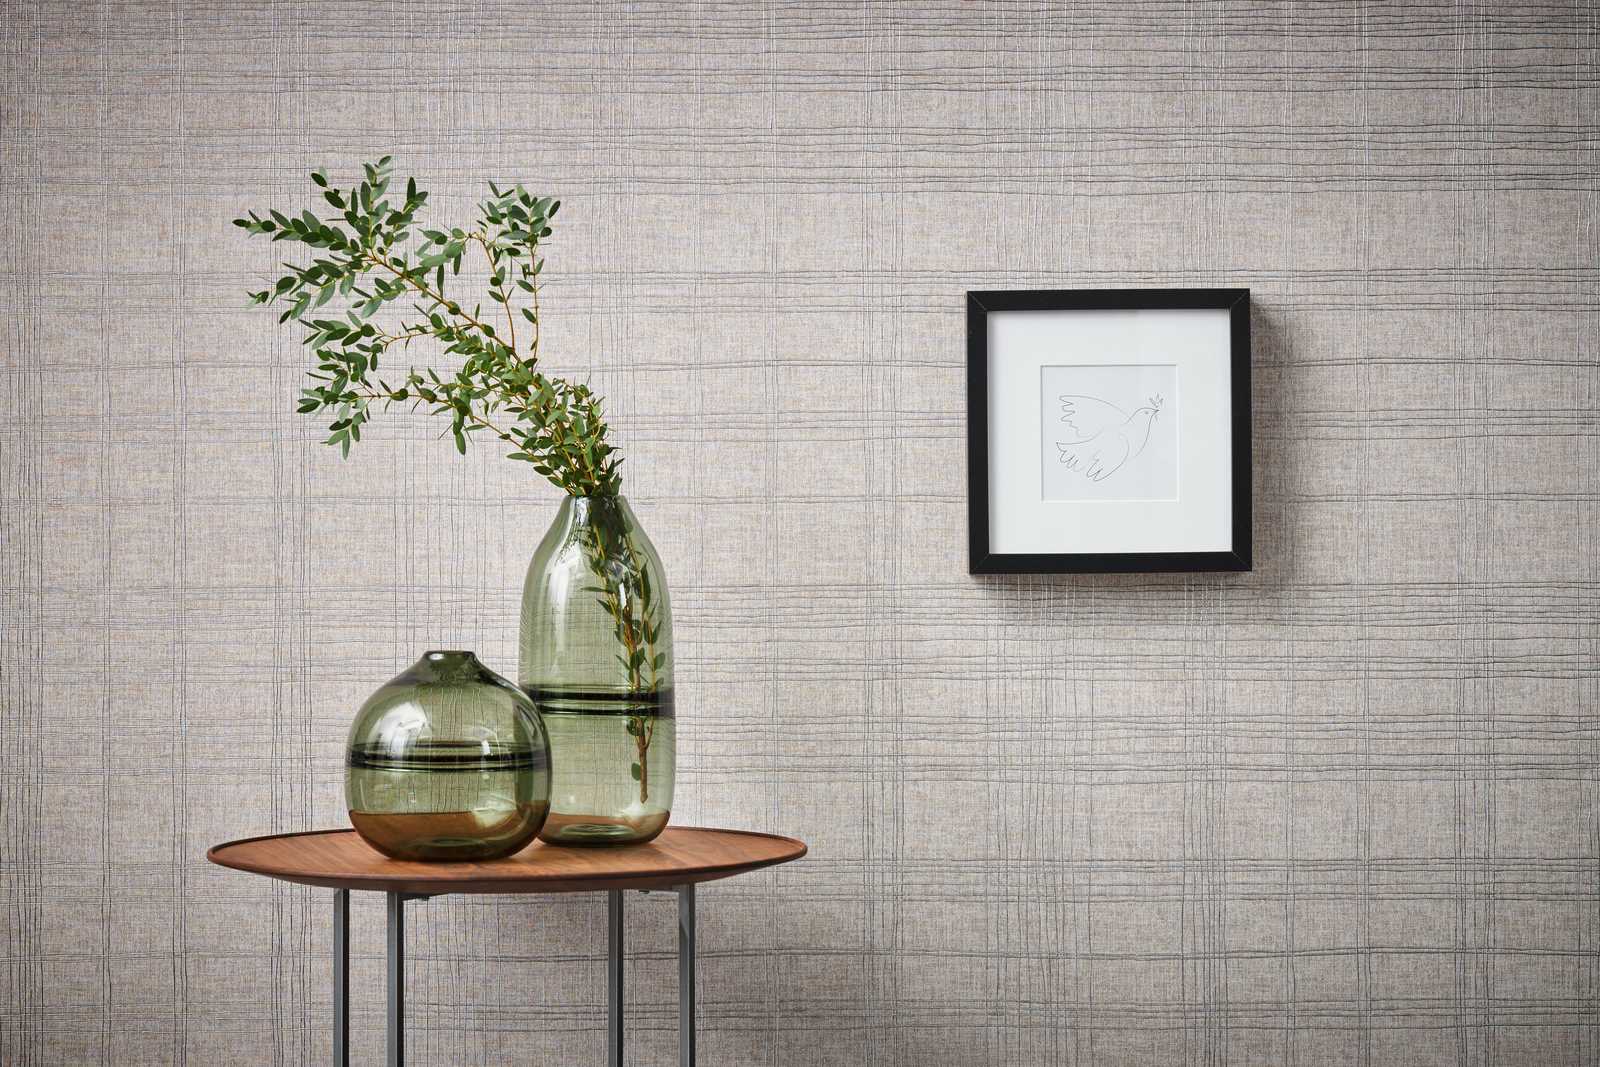             Non-woven wallpaper with line pattern with metallic effect - beige, metallic
        